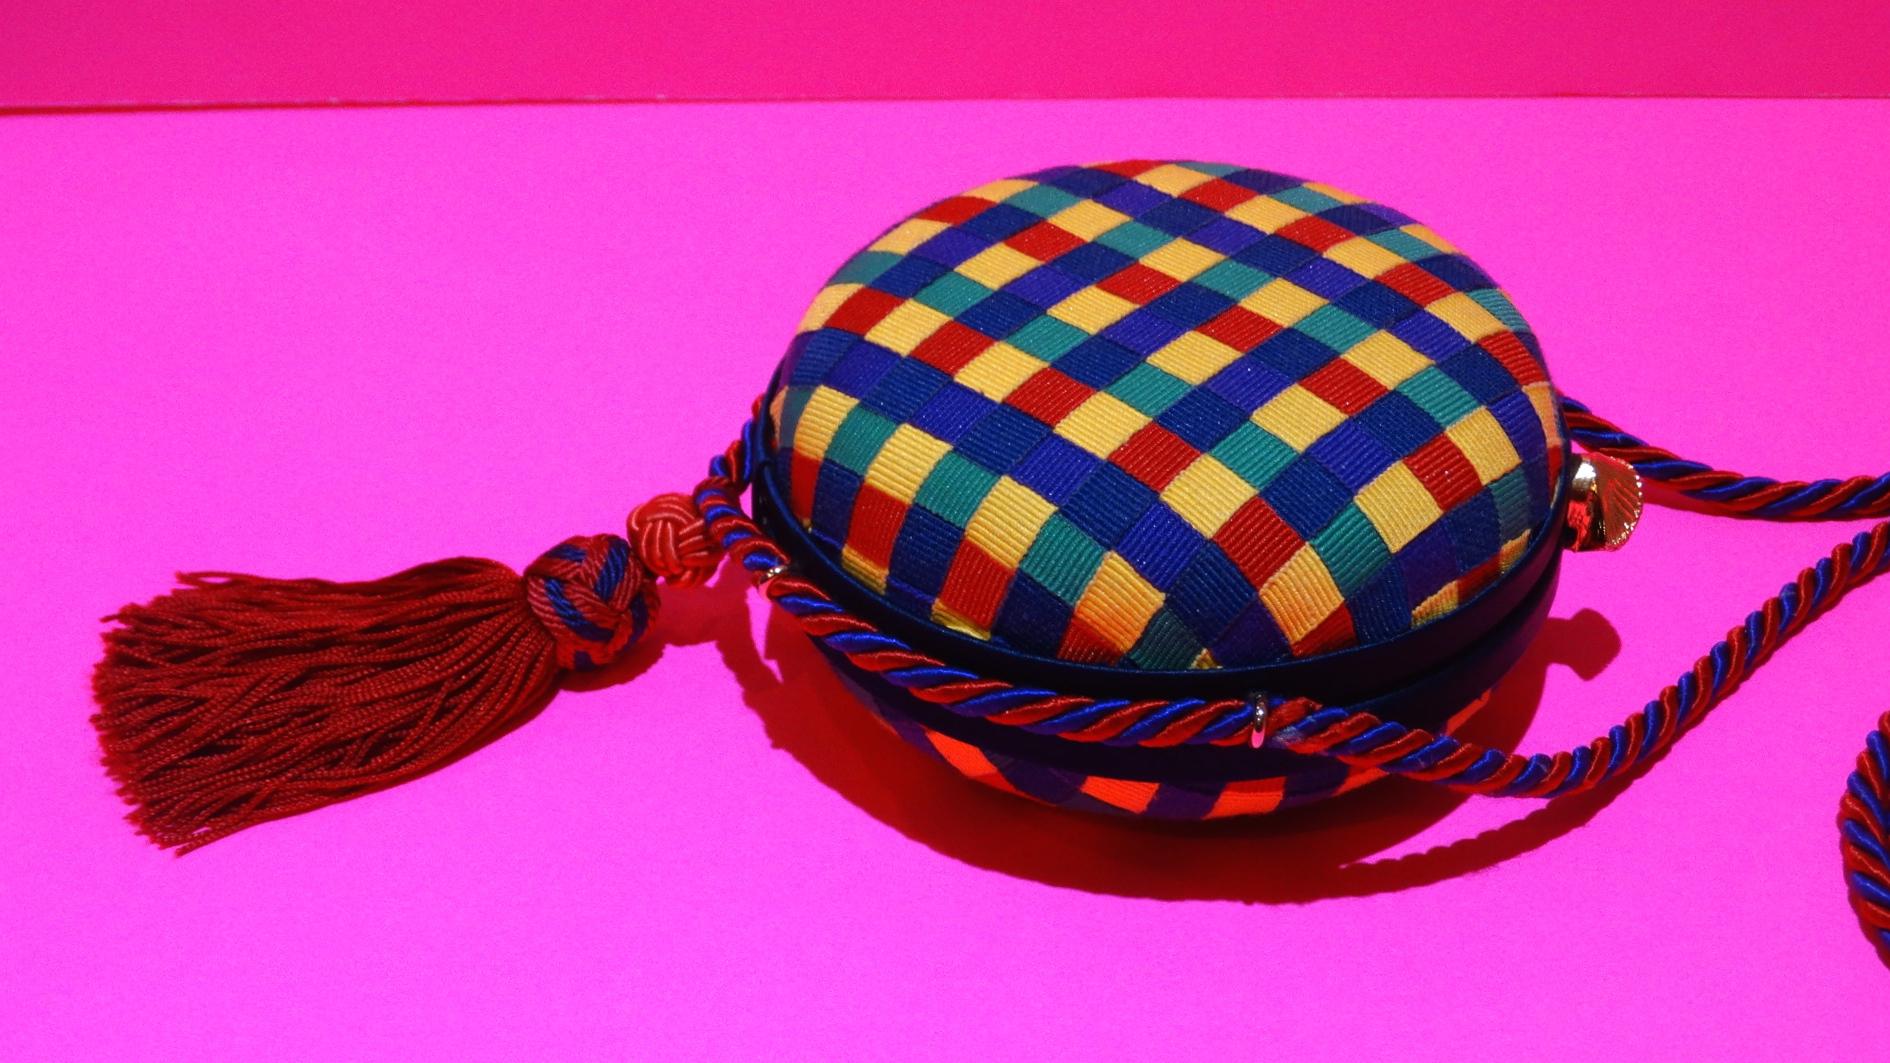 Your perfect little summer bag has arrived! Adorable 1980s plaid printed circular bag from designer Bottega Veneta! Printed all over in a rainbow gingham style plaid fabric with red and blue braided trim. Matching red and blue tassel suspended from